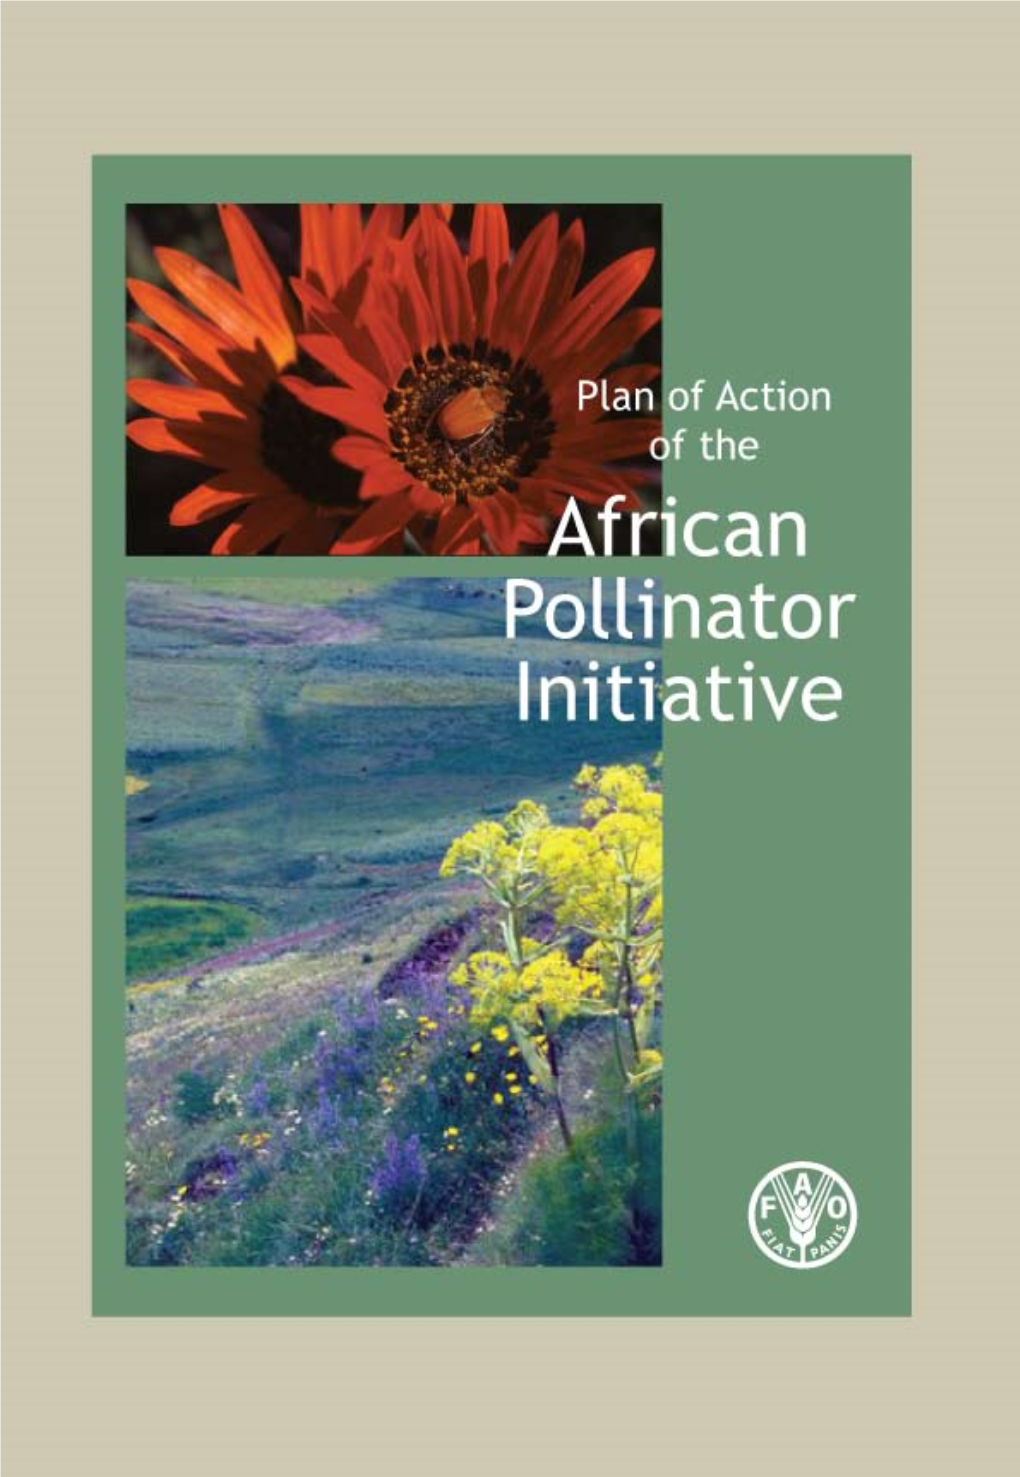 Plan of Action of the African Pollinator Initiative